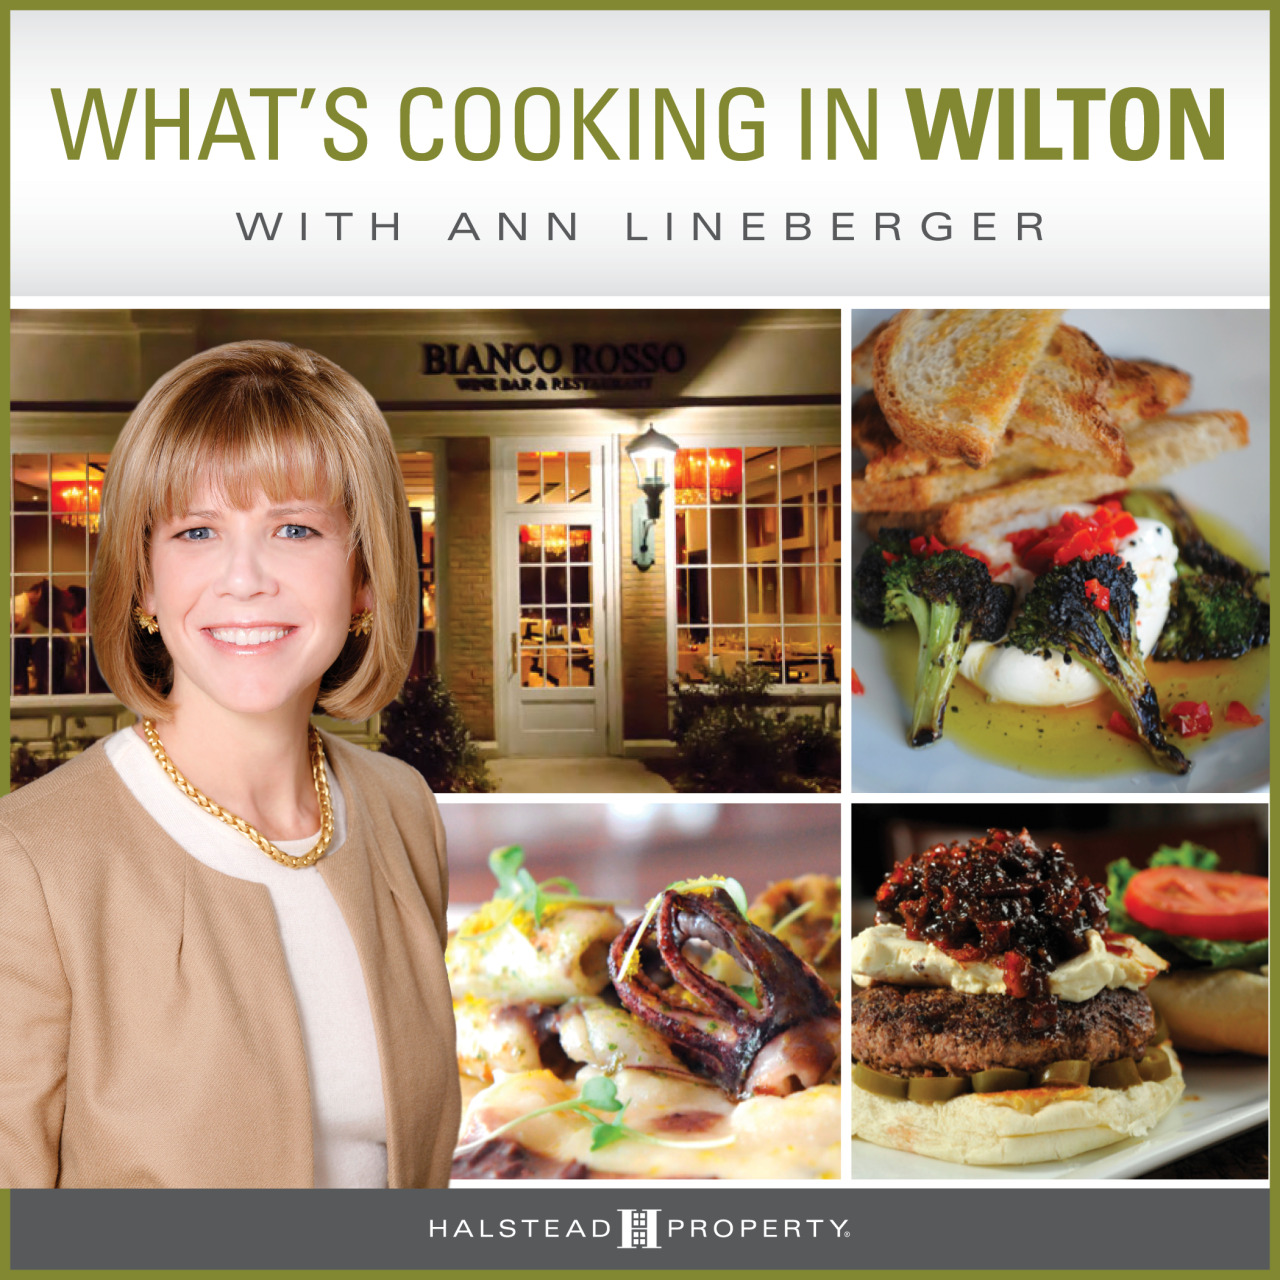 WHAT’S COOKING IN WILTON with Ann Lineberger, Halstead Property Wilton Office.
Discover What’s Cooking during the Second Annual Restaurant Week in Wilton Connecticut.
Following the success of the first of its kind in Stamford is the 2nd annual Wilton...